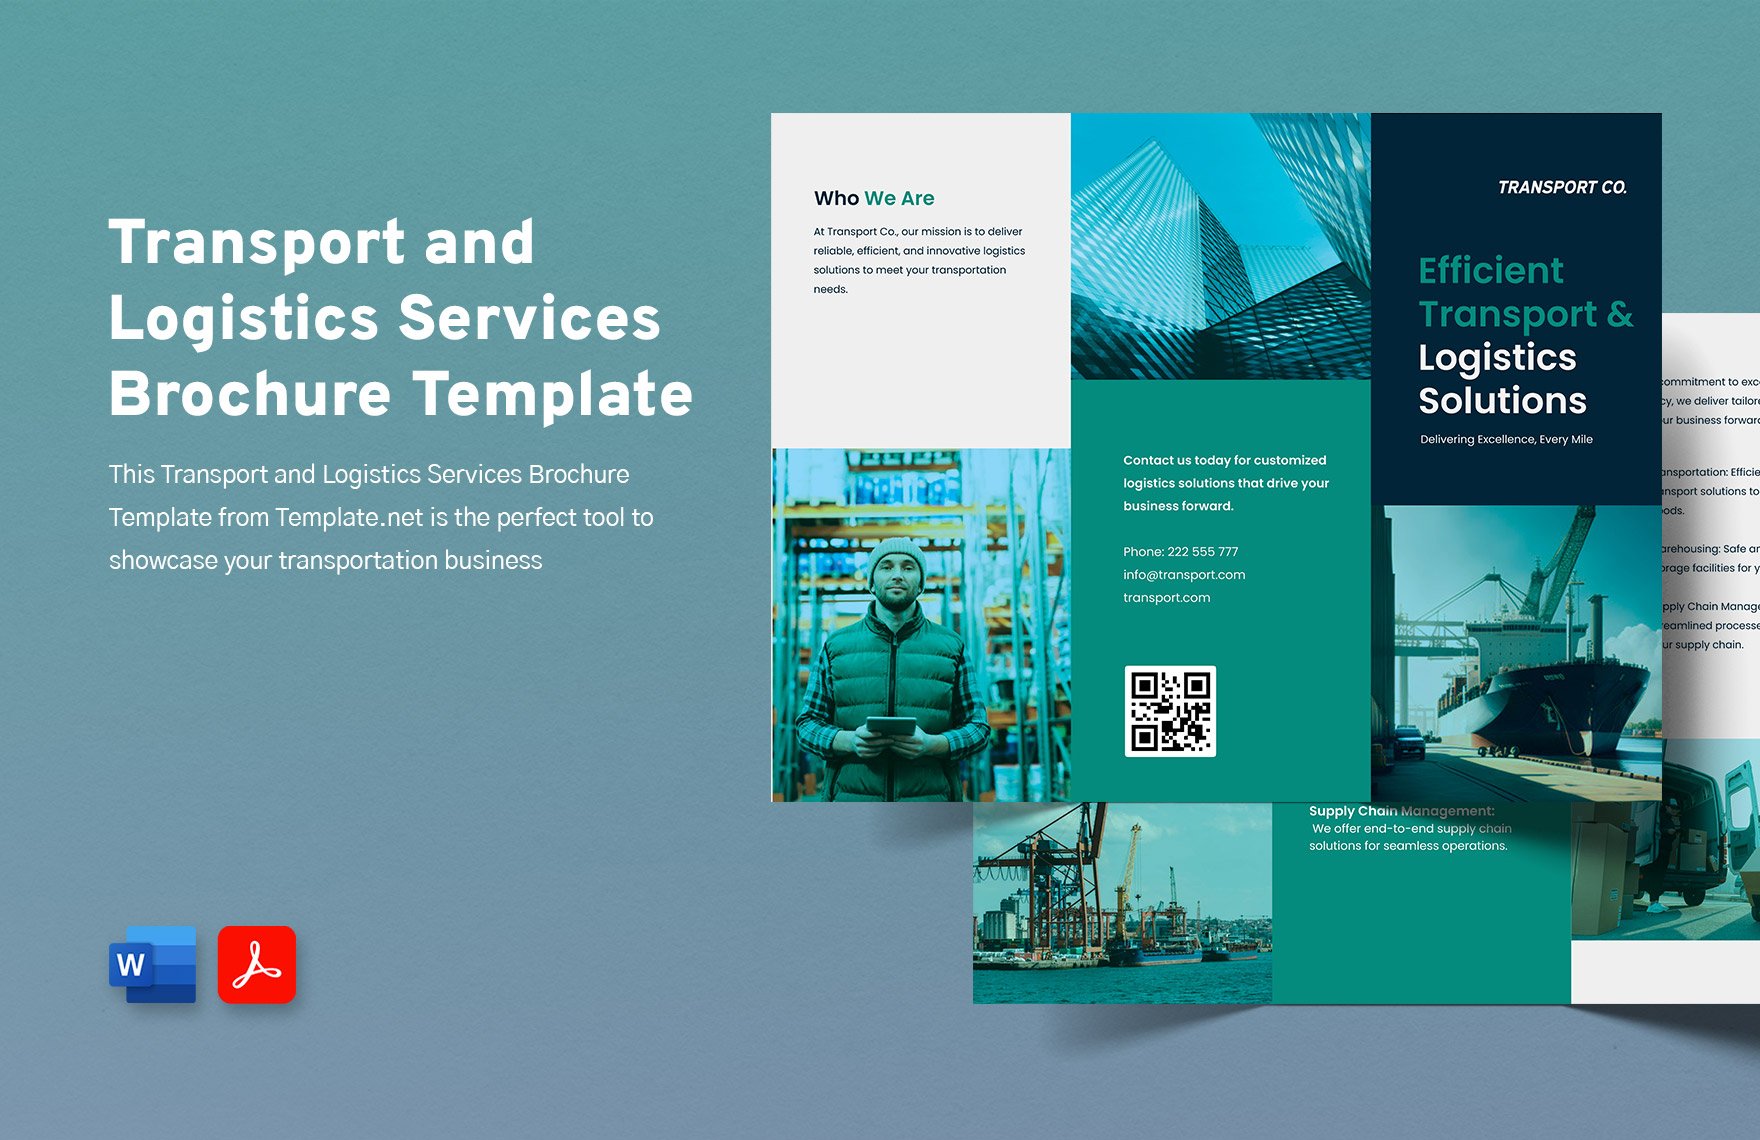 Transport and Logistics Services Brochure Template in Word, PDF